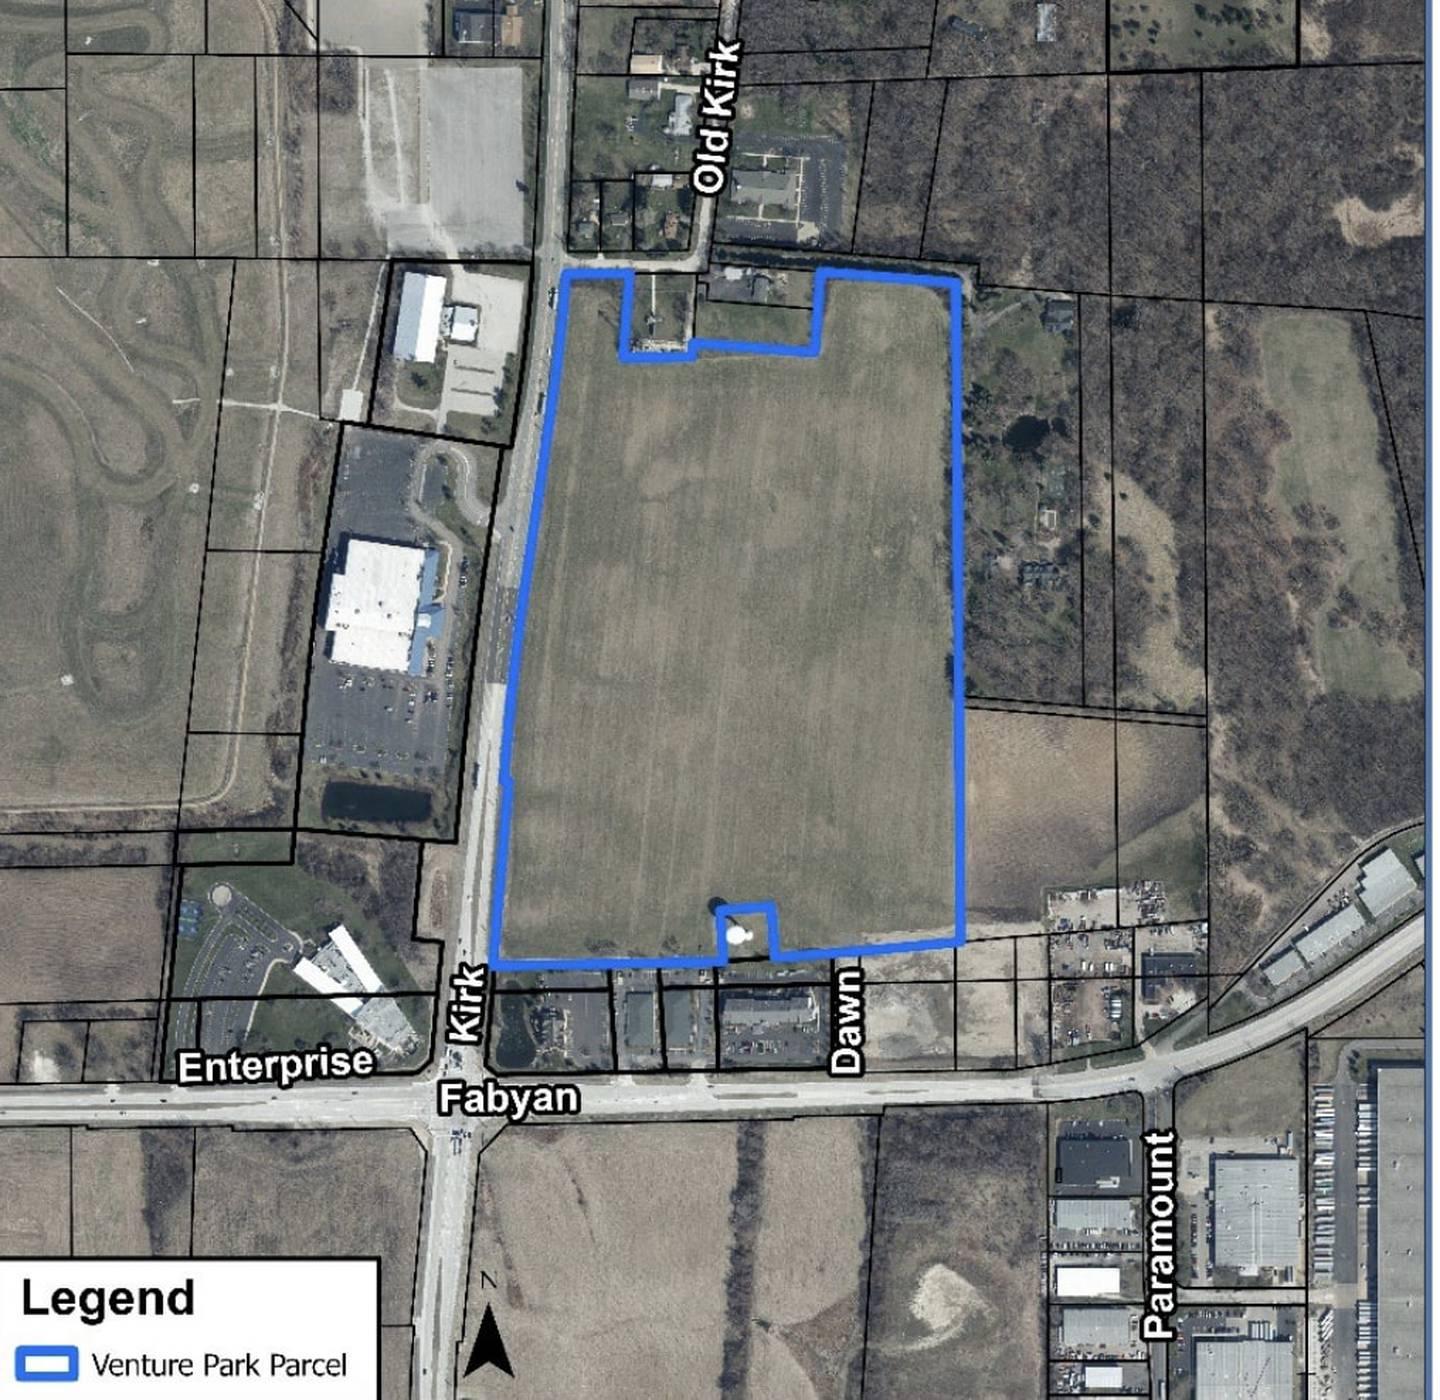 Venture One Acquisitions LLC is seeking to annex and nearly 60 acres on Geneva's east side to allow for a warehouse distribution center. The application comes before the Planning and Zoning Commission at 7 p.m. Thursday at Geneva City Hall.